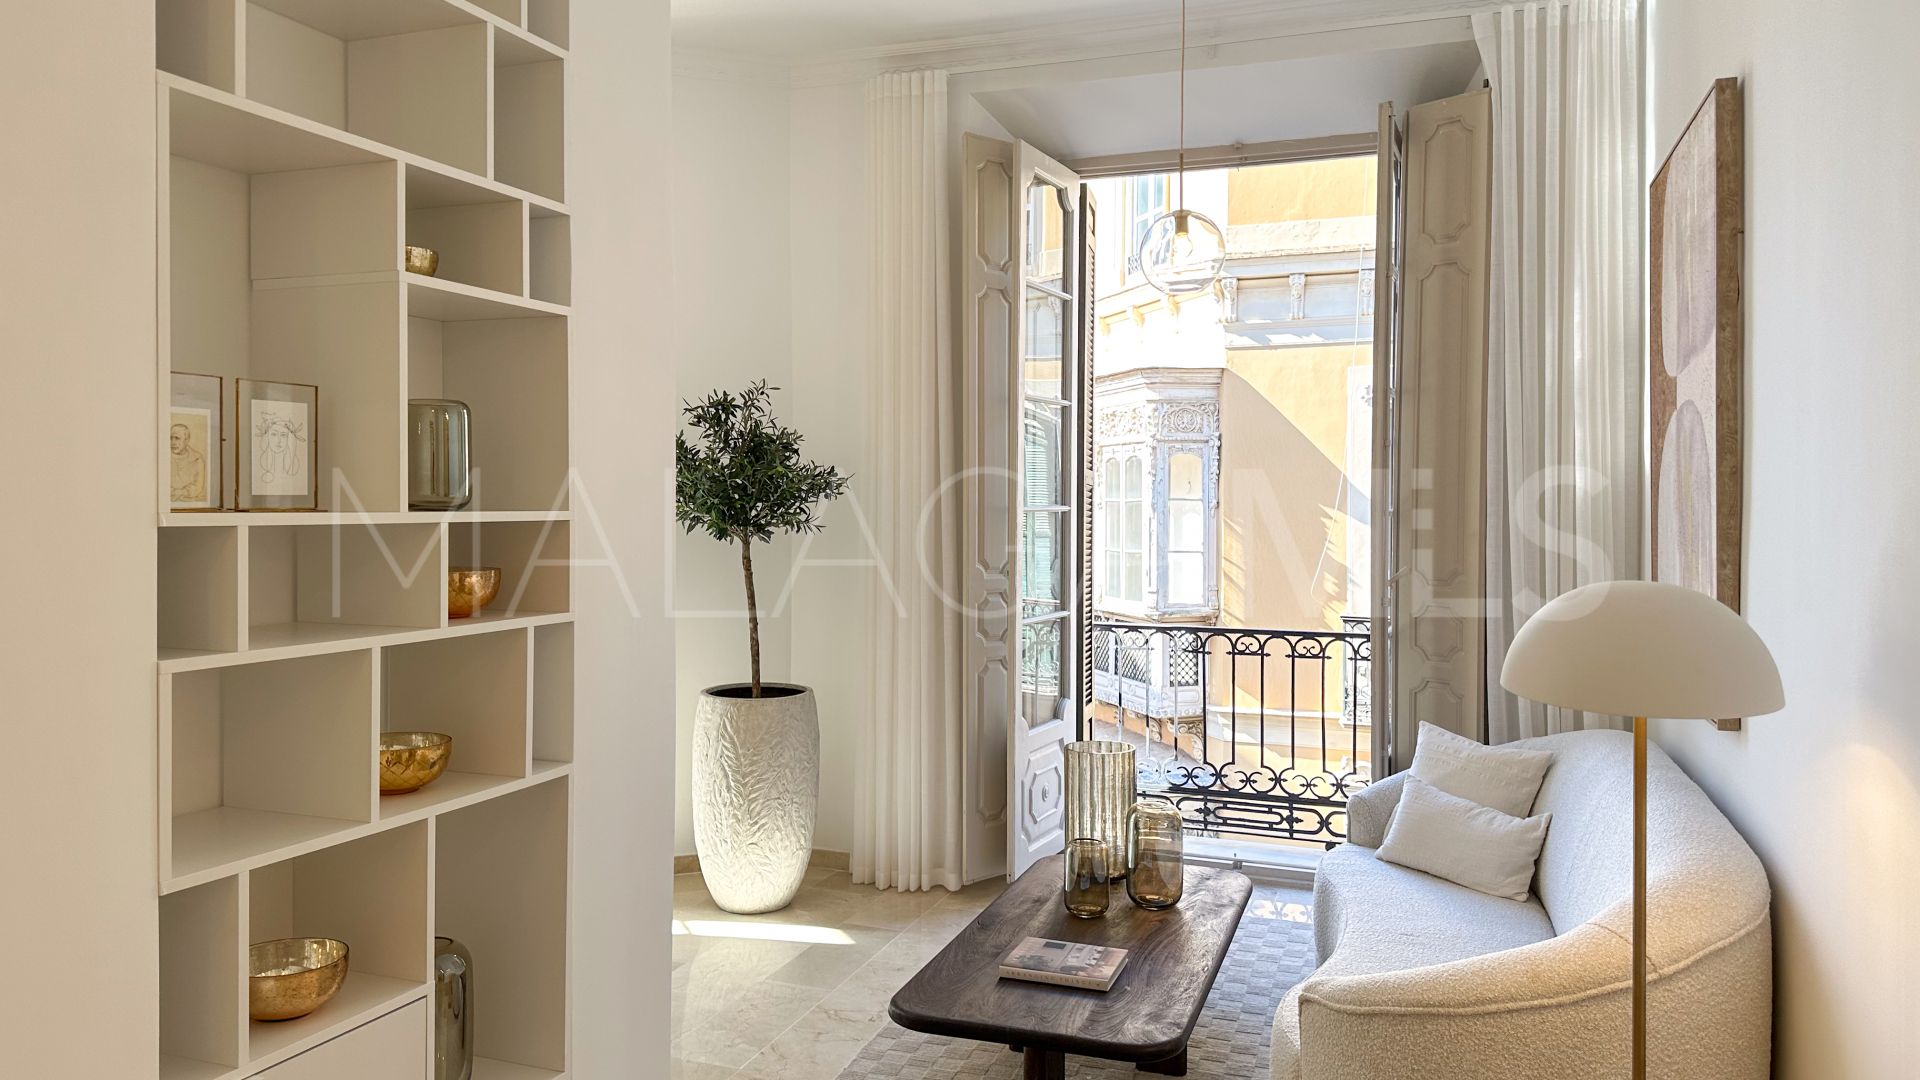 For sale apartment in Centro Histórico with 3 bedrooms